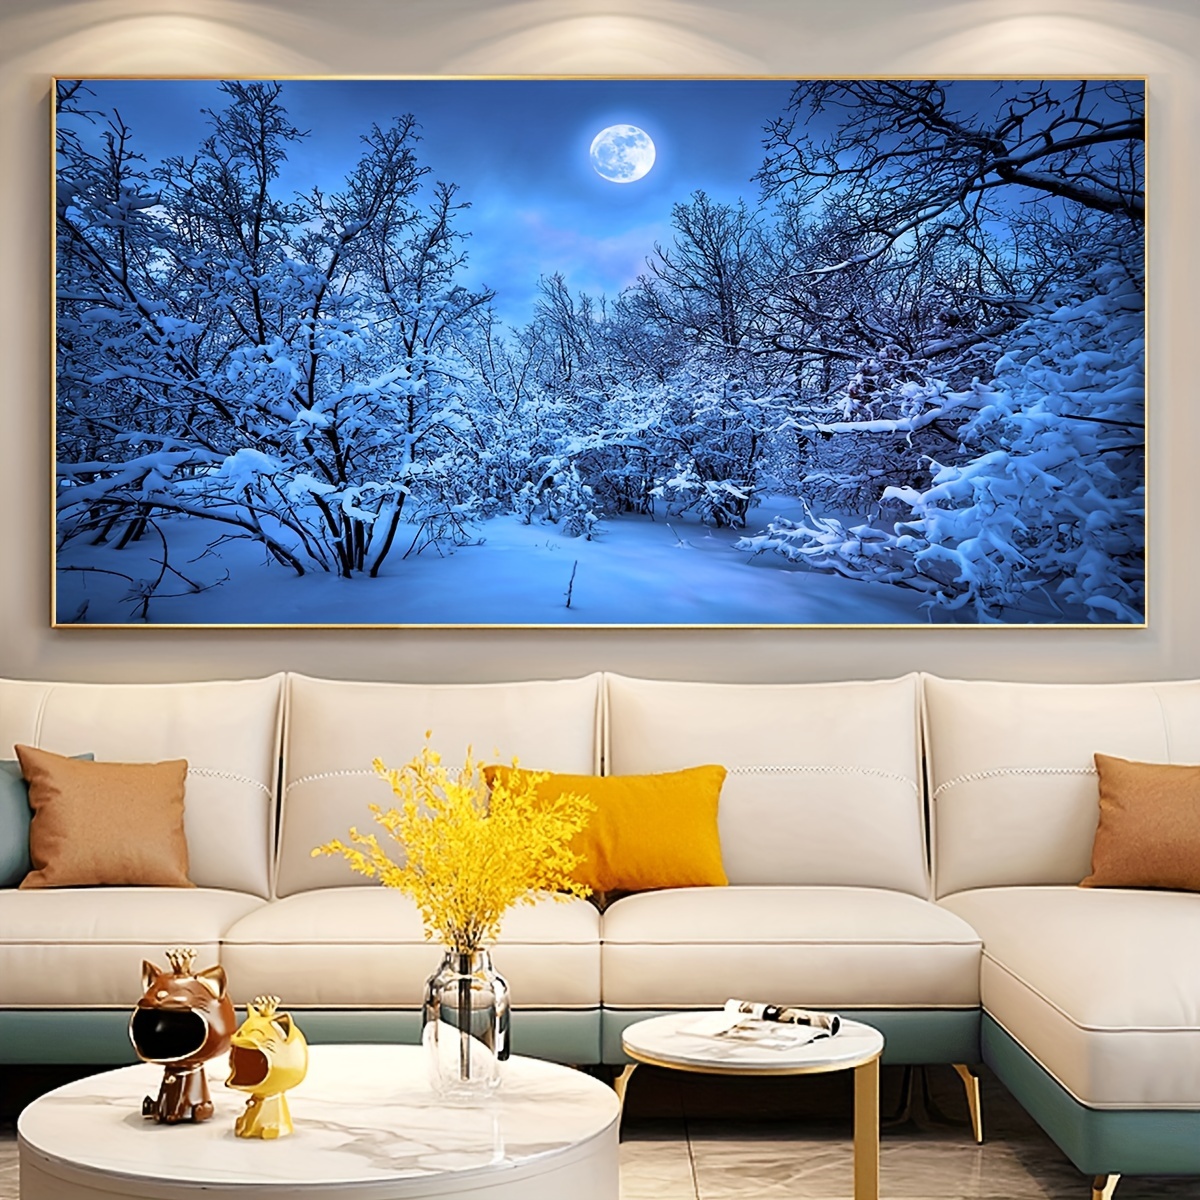 

1pc Unframed Canvas Poster, Modern Art, Forest Snow Night Scenery, Ideal Gift For Bedroom Living Room Corridor, Wall Art, Wall Decor, Winter Decor, Room Decoration